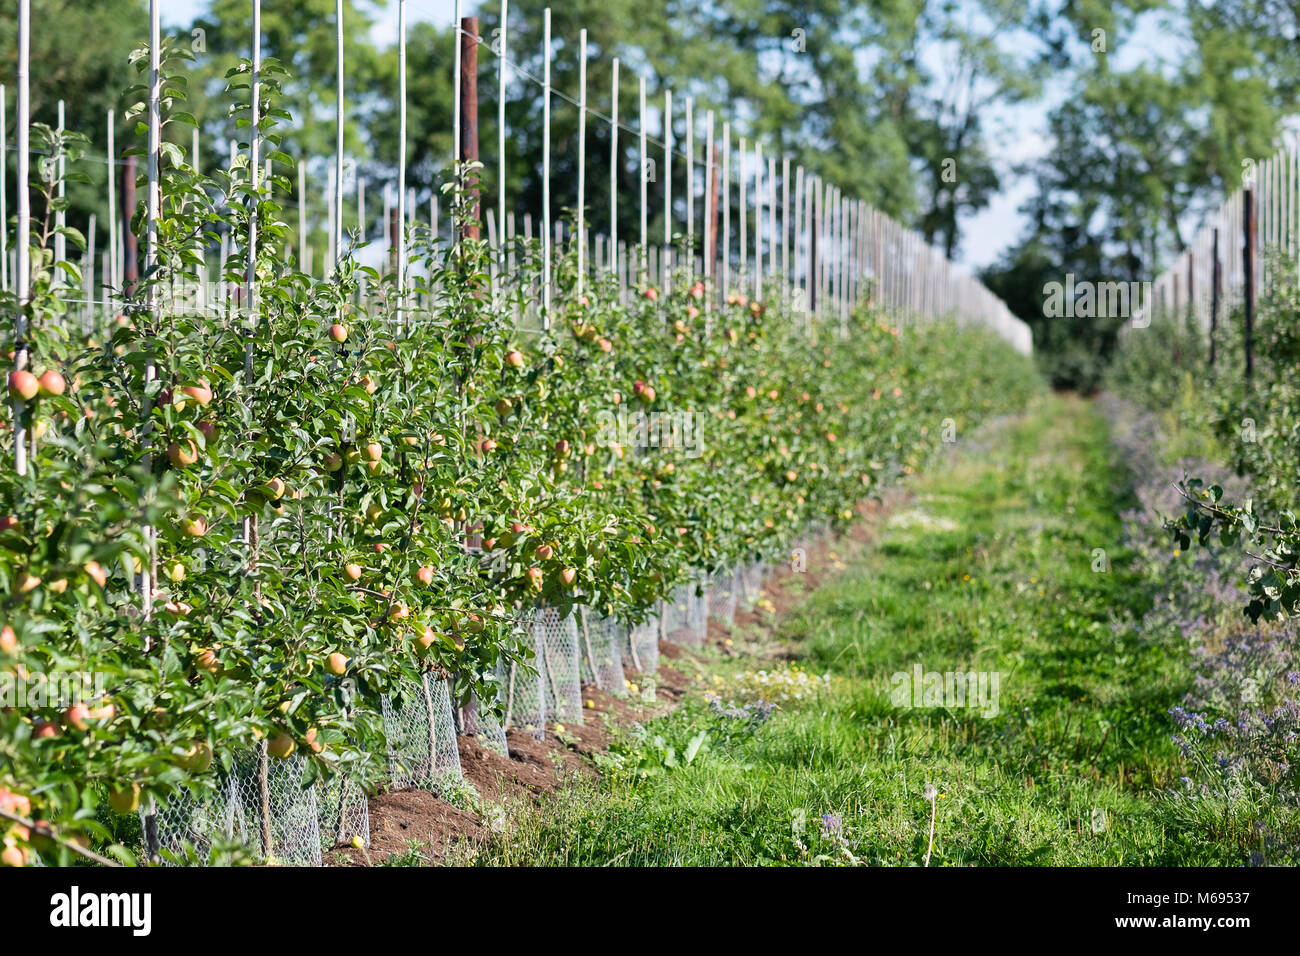 Young fruit trees in modern orchard on fruit farm Stock Photo